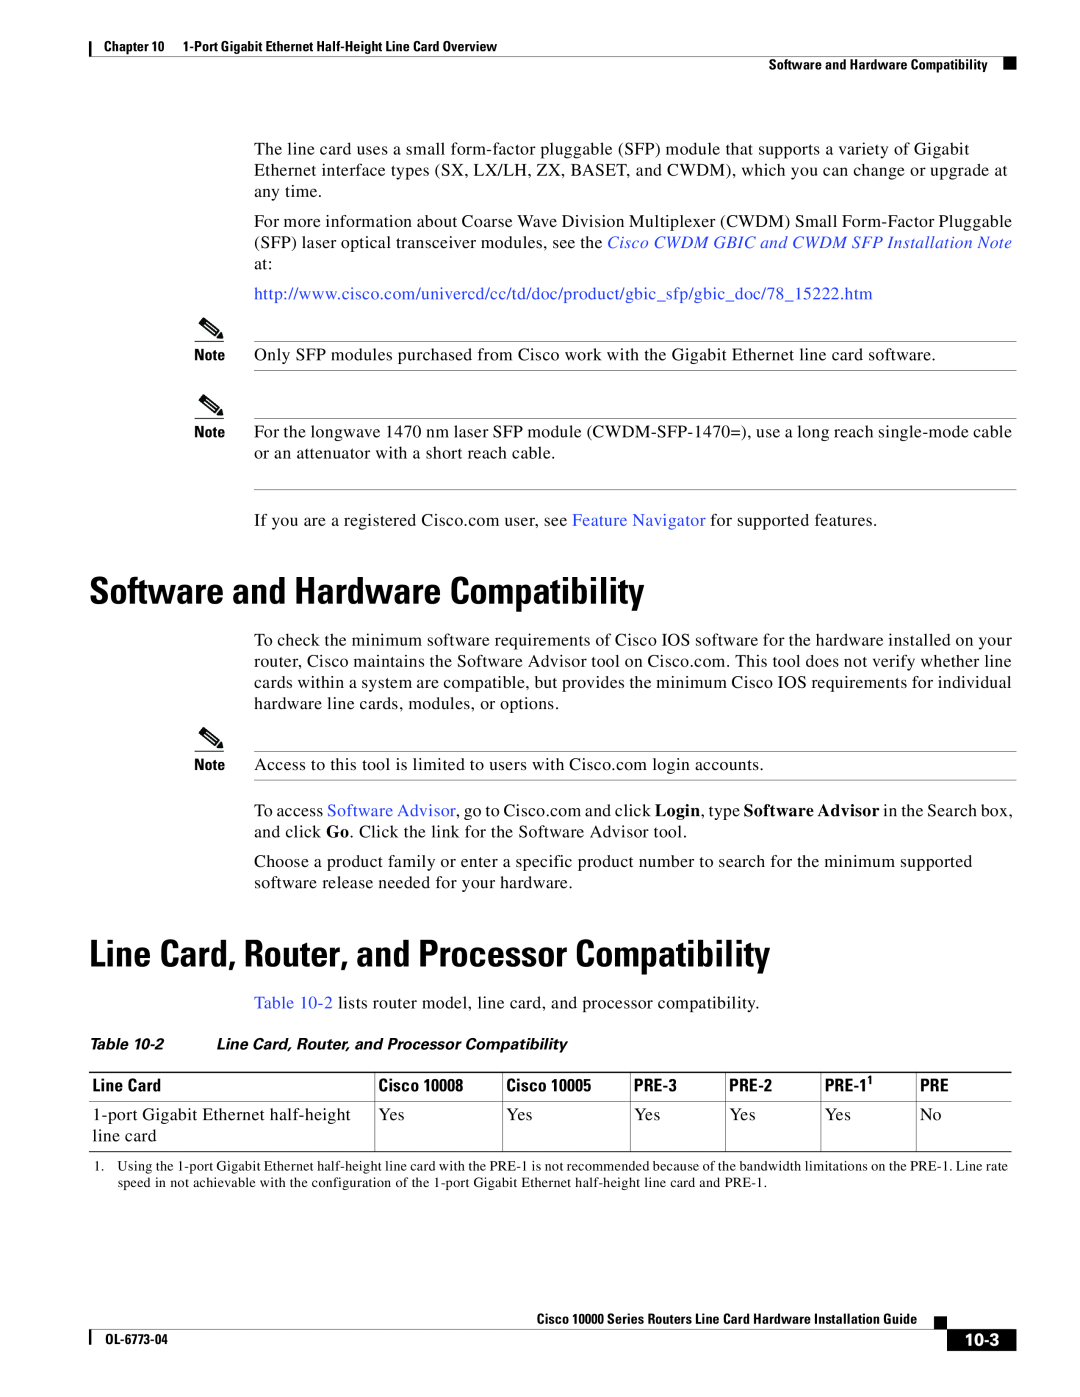 Cisco Systems 10000 Series Software and Hardware Compatibility, Line Card, Router, and Processor Compatibility, 10-3 